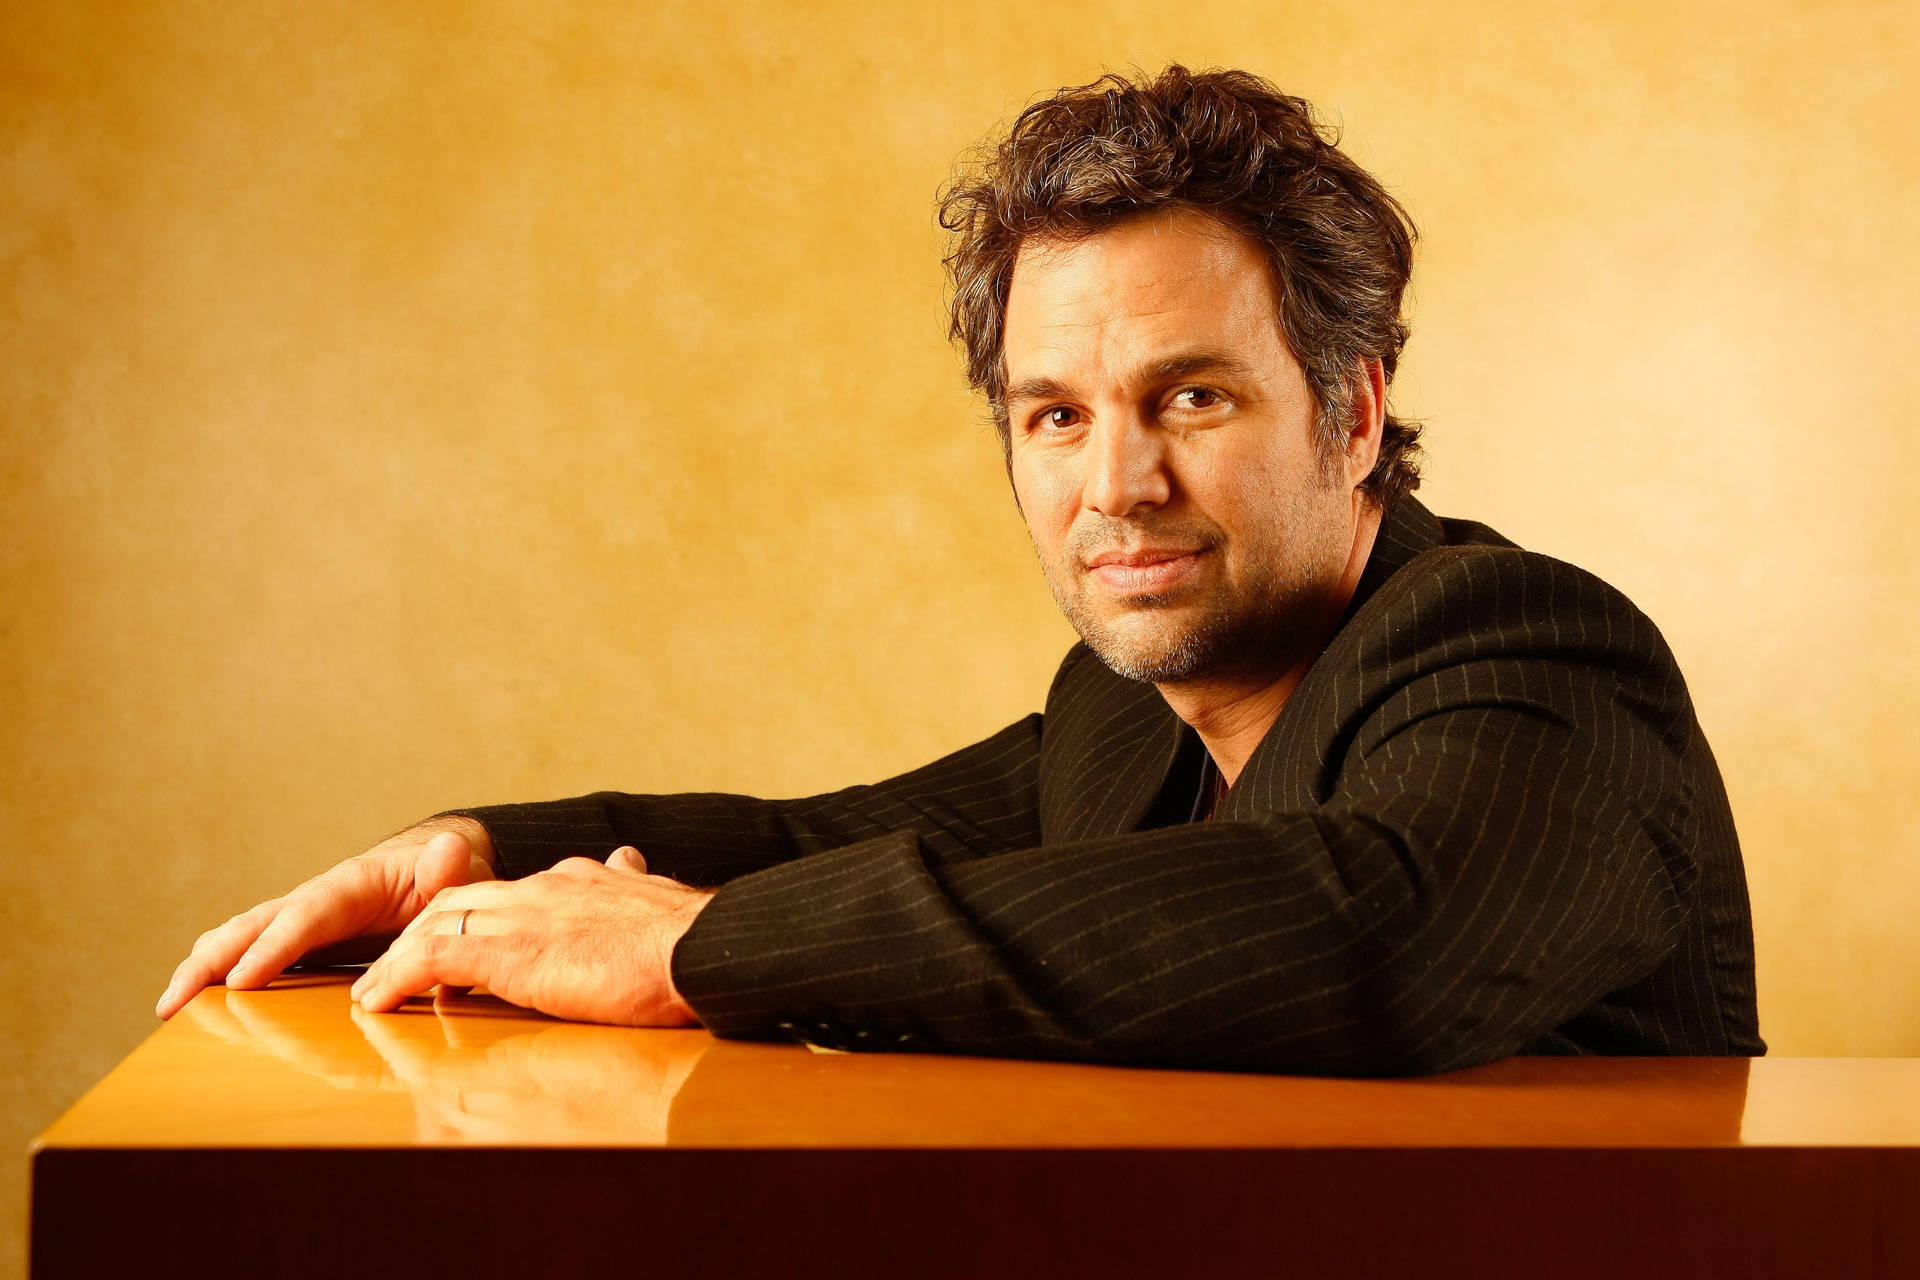 Hollywood Actor Mark Ruffalo In A Pensive Moment Background